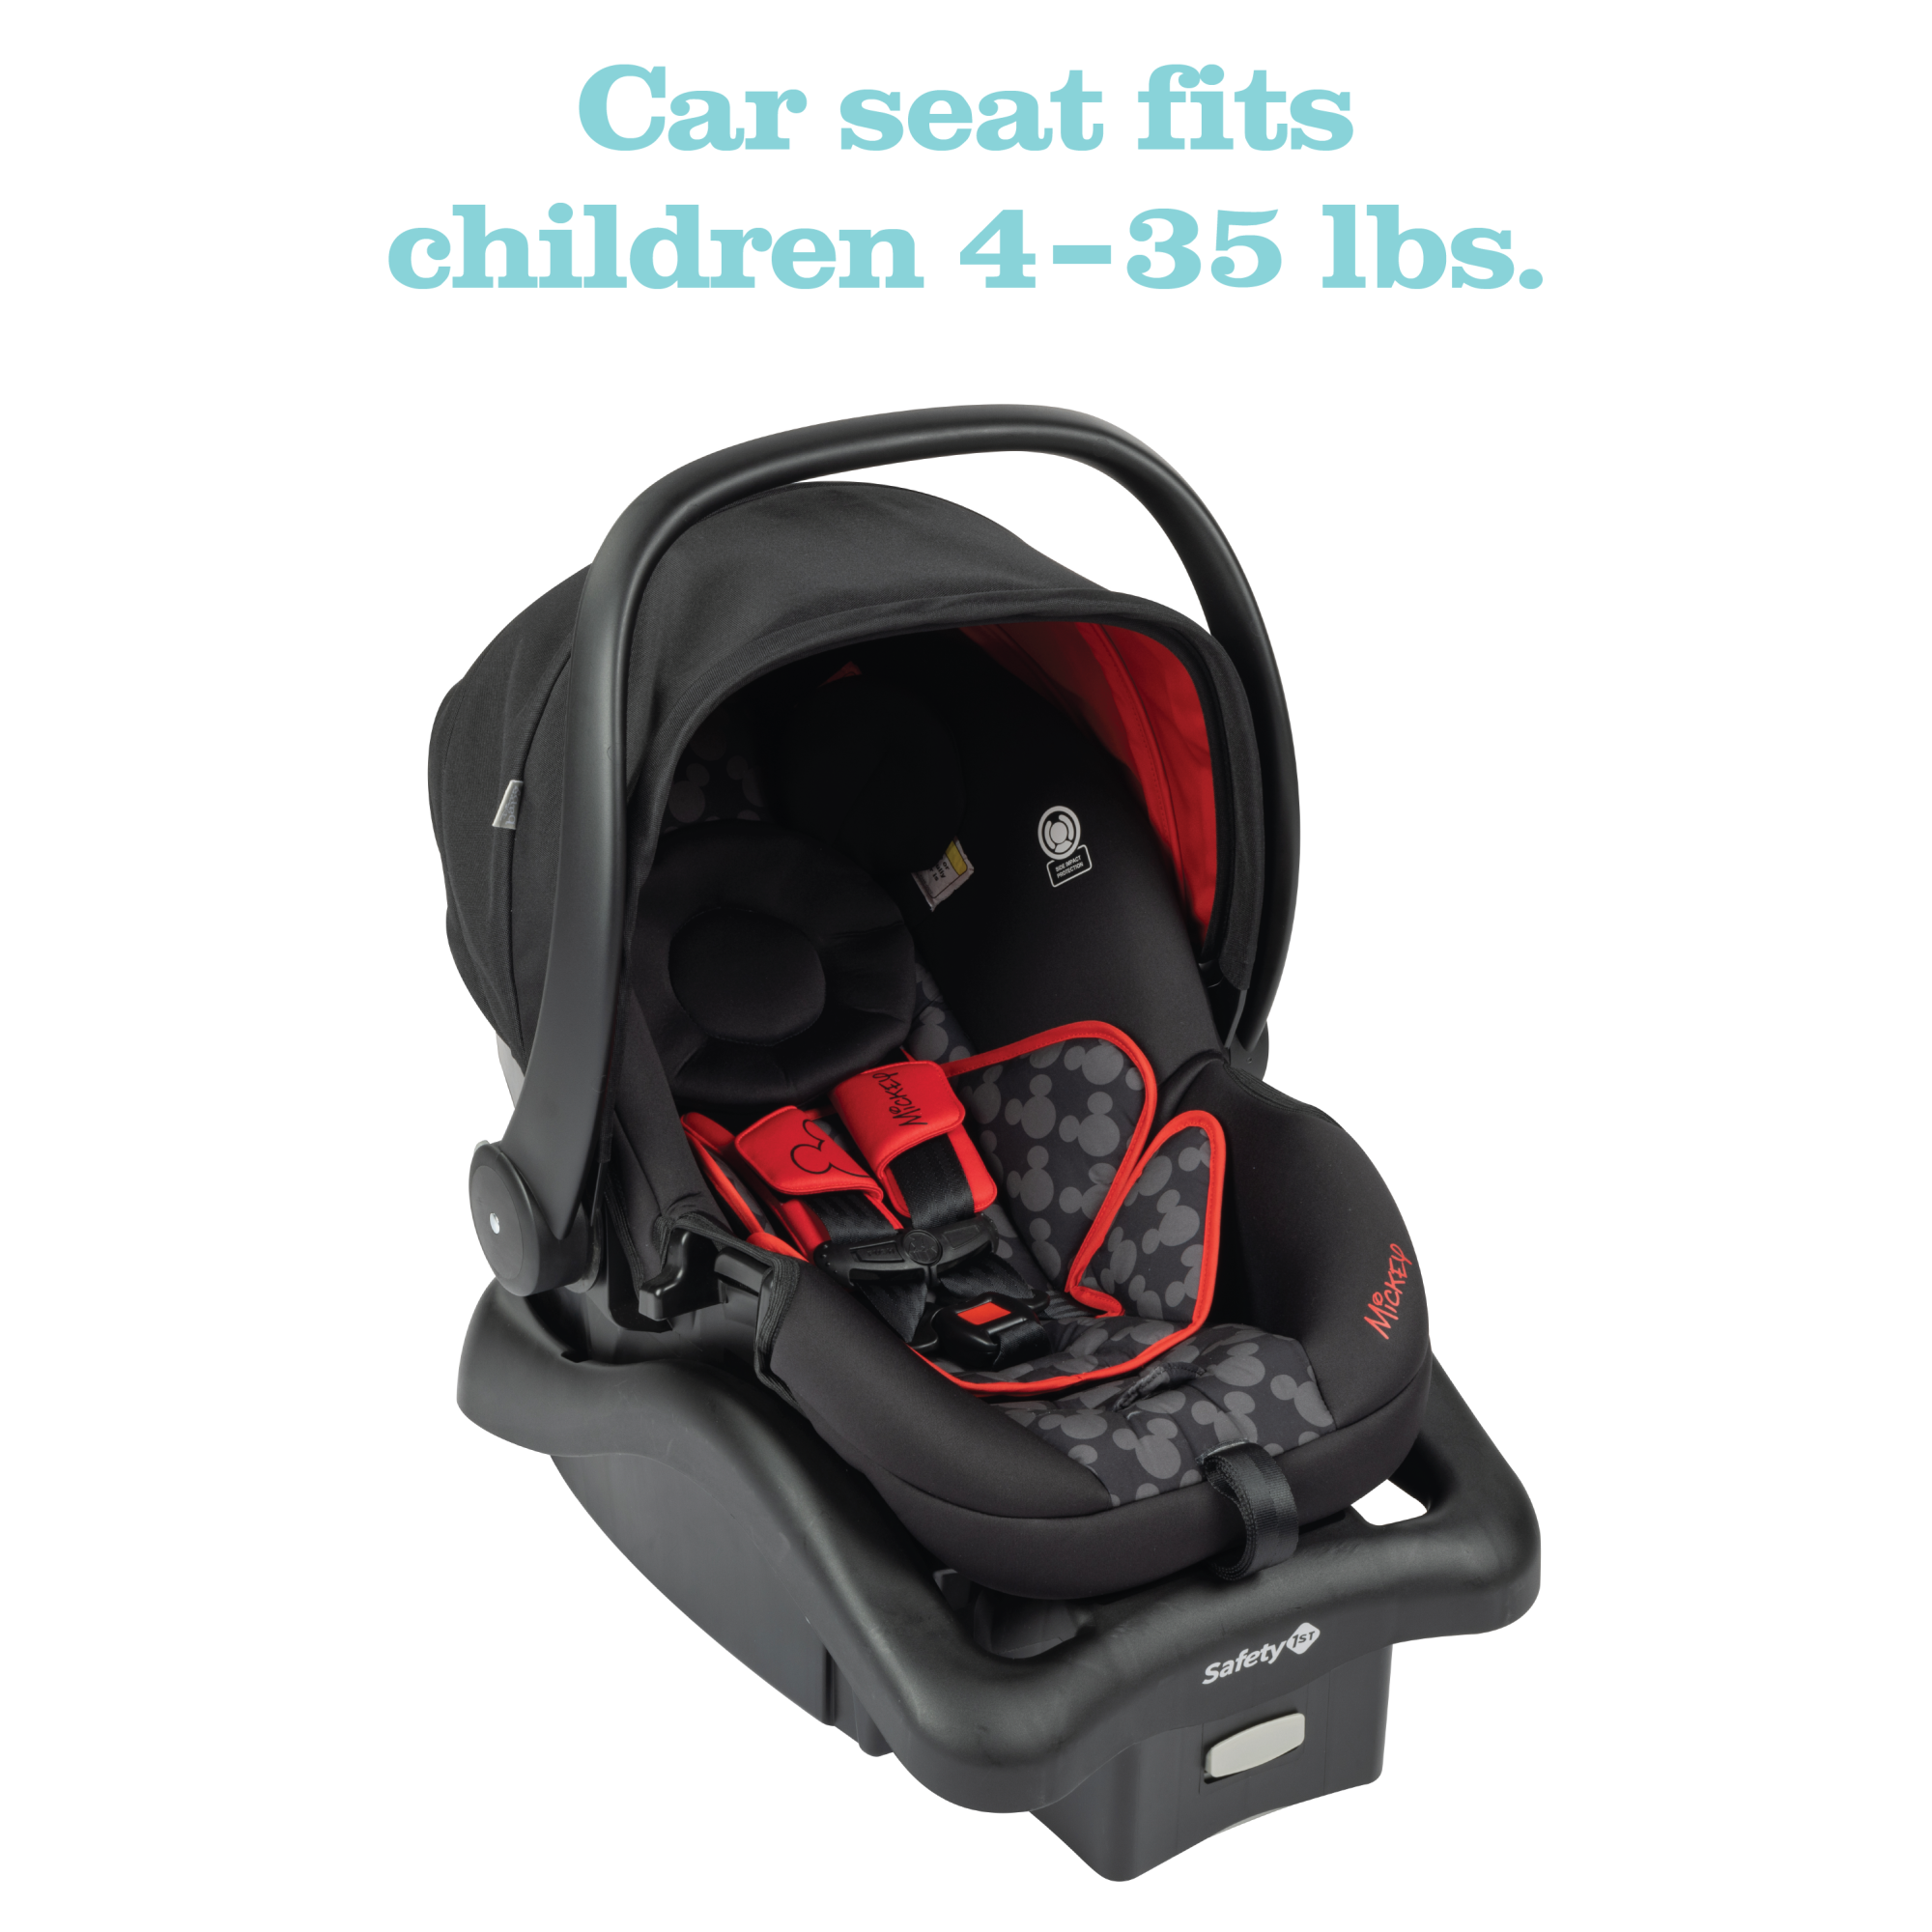 Disney Baby Grow and Go™ Modular Travel System - stroller seat reclines in both directions